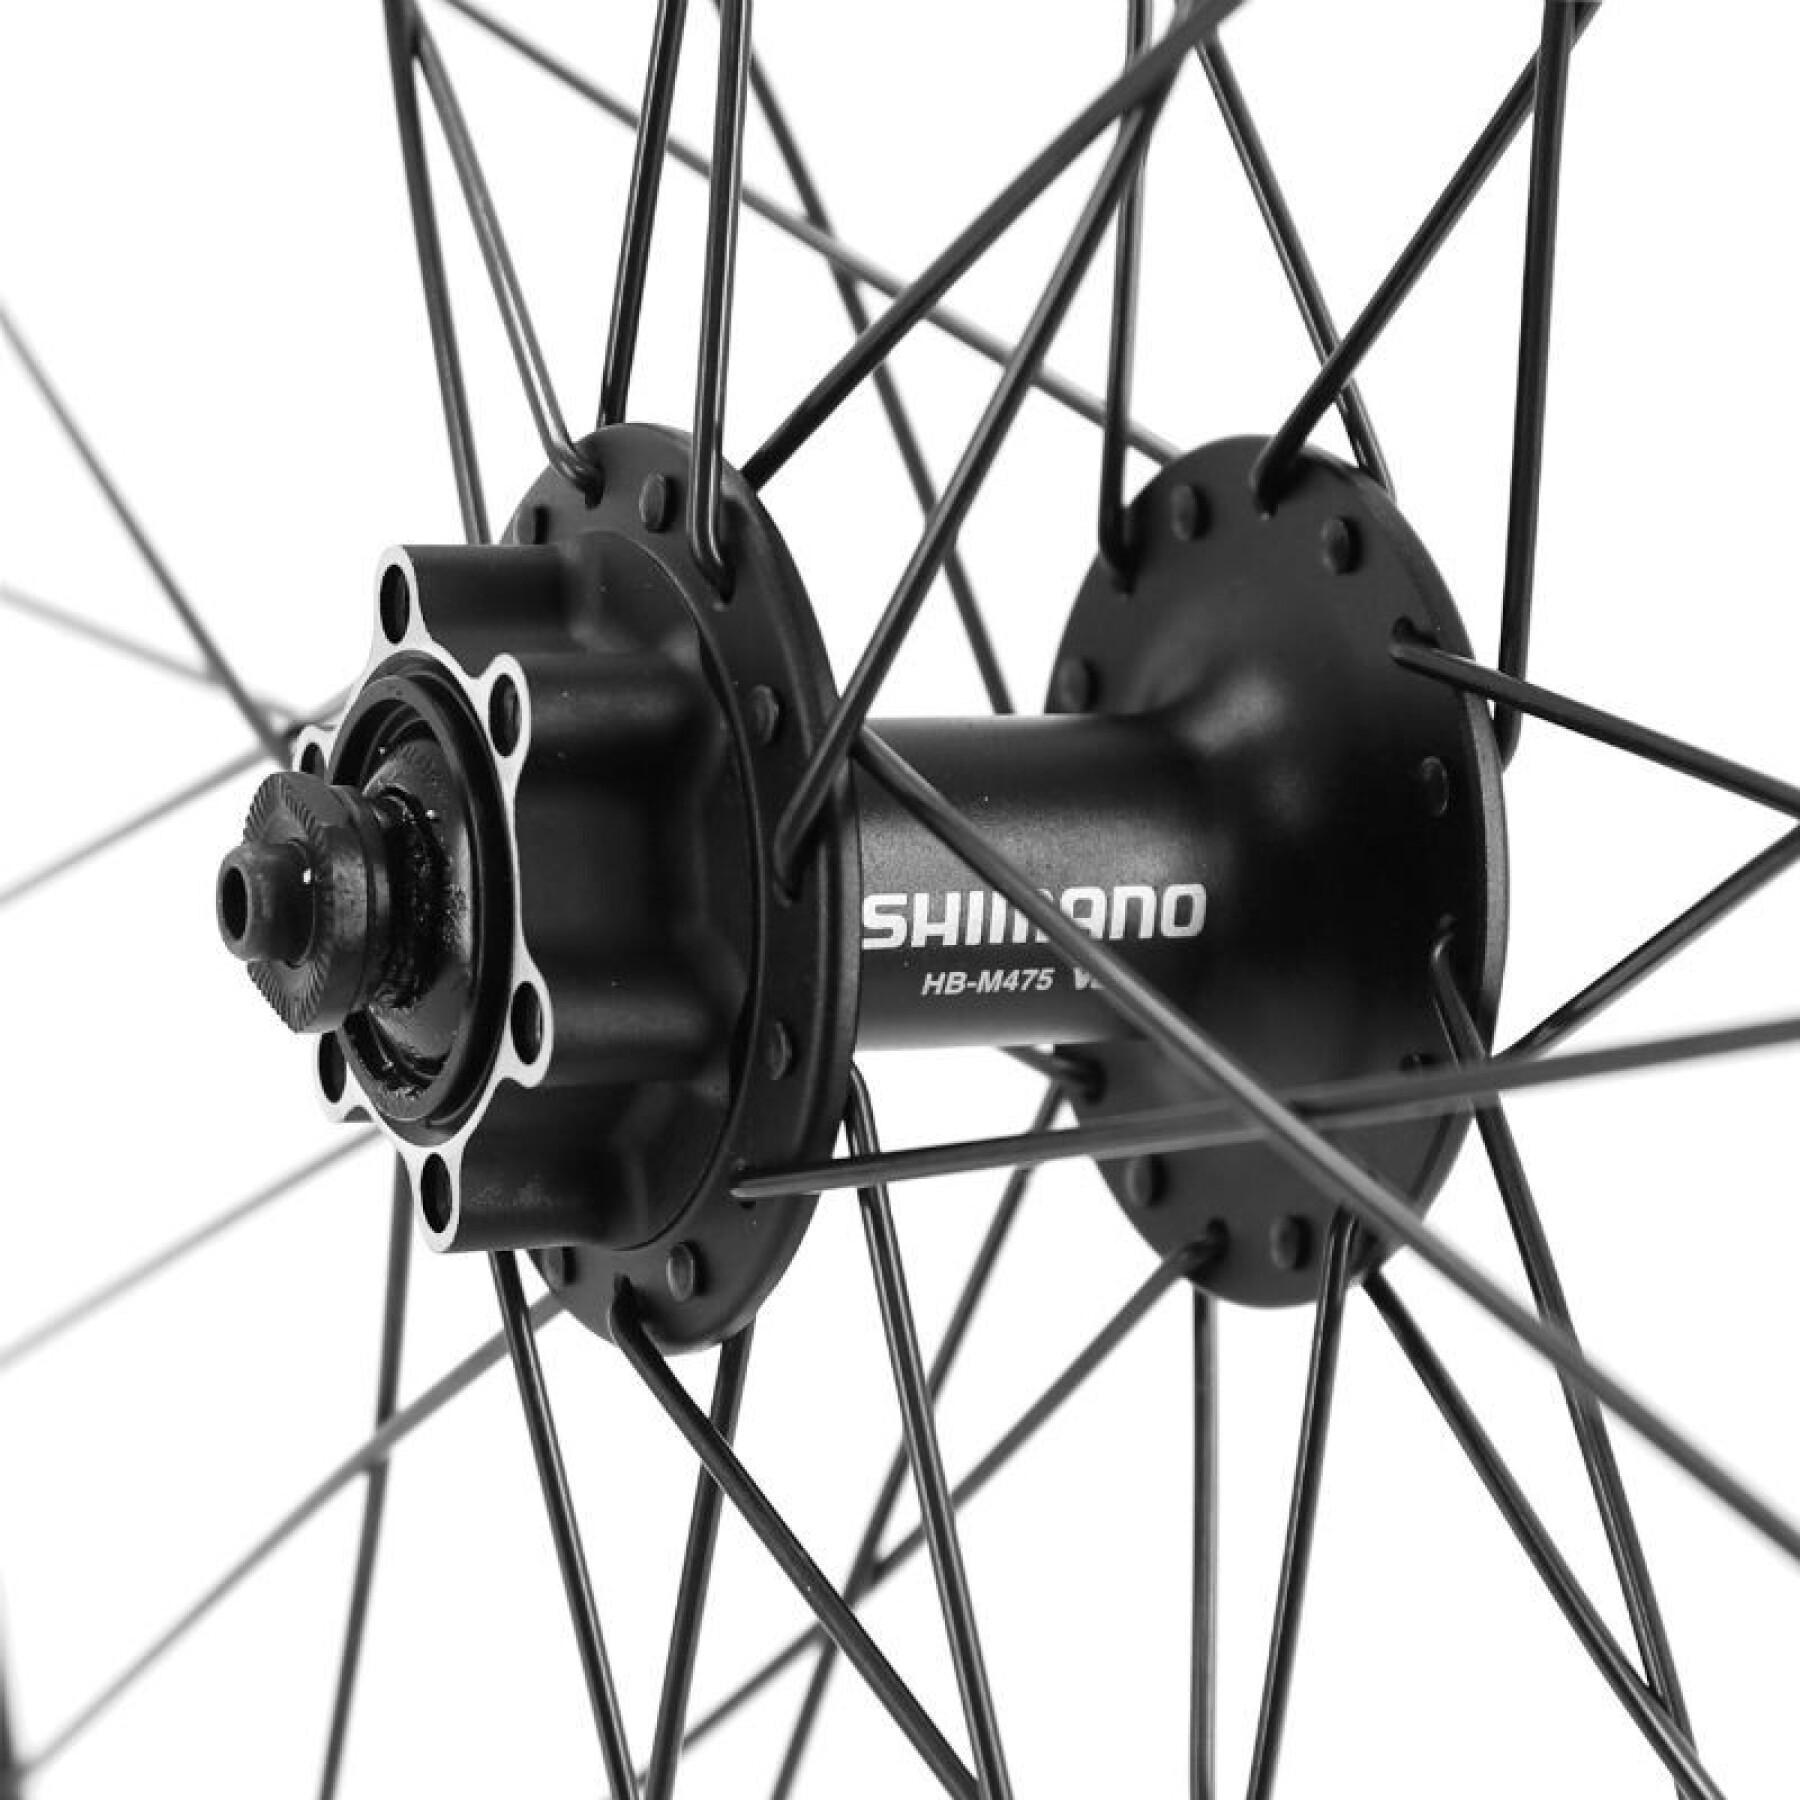 6-hole tubeless front wheel with reinforced spokes Velox Klixx Shimano M475